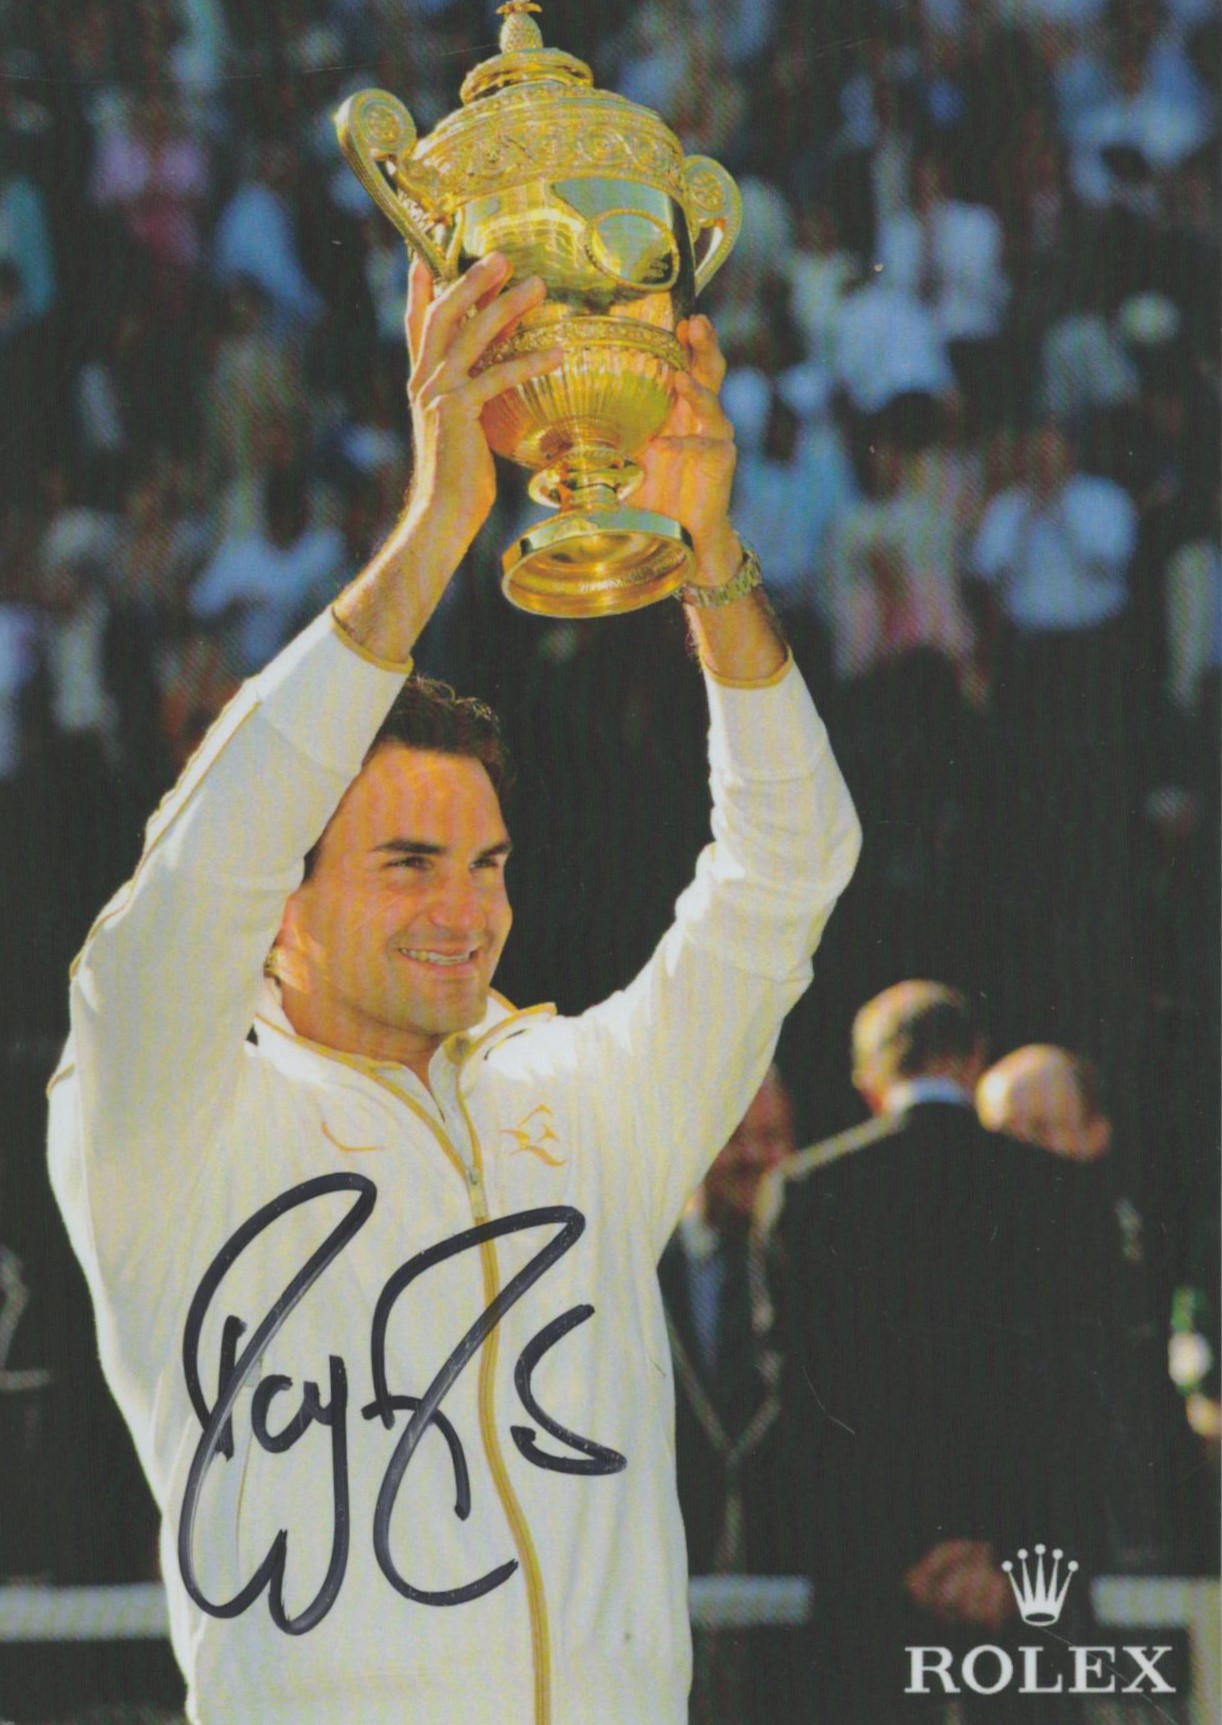 Roger Federer signed 6x4 inch Rolex colour promo photo. Good condition. All autographs come with a